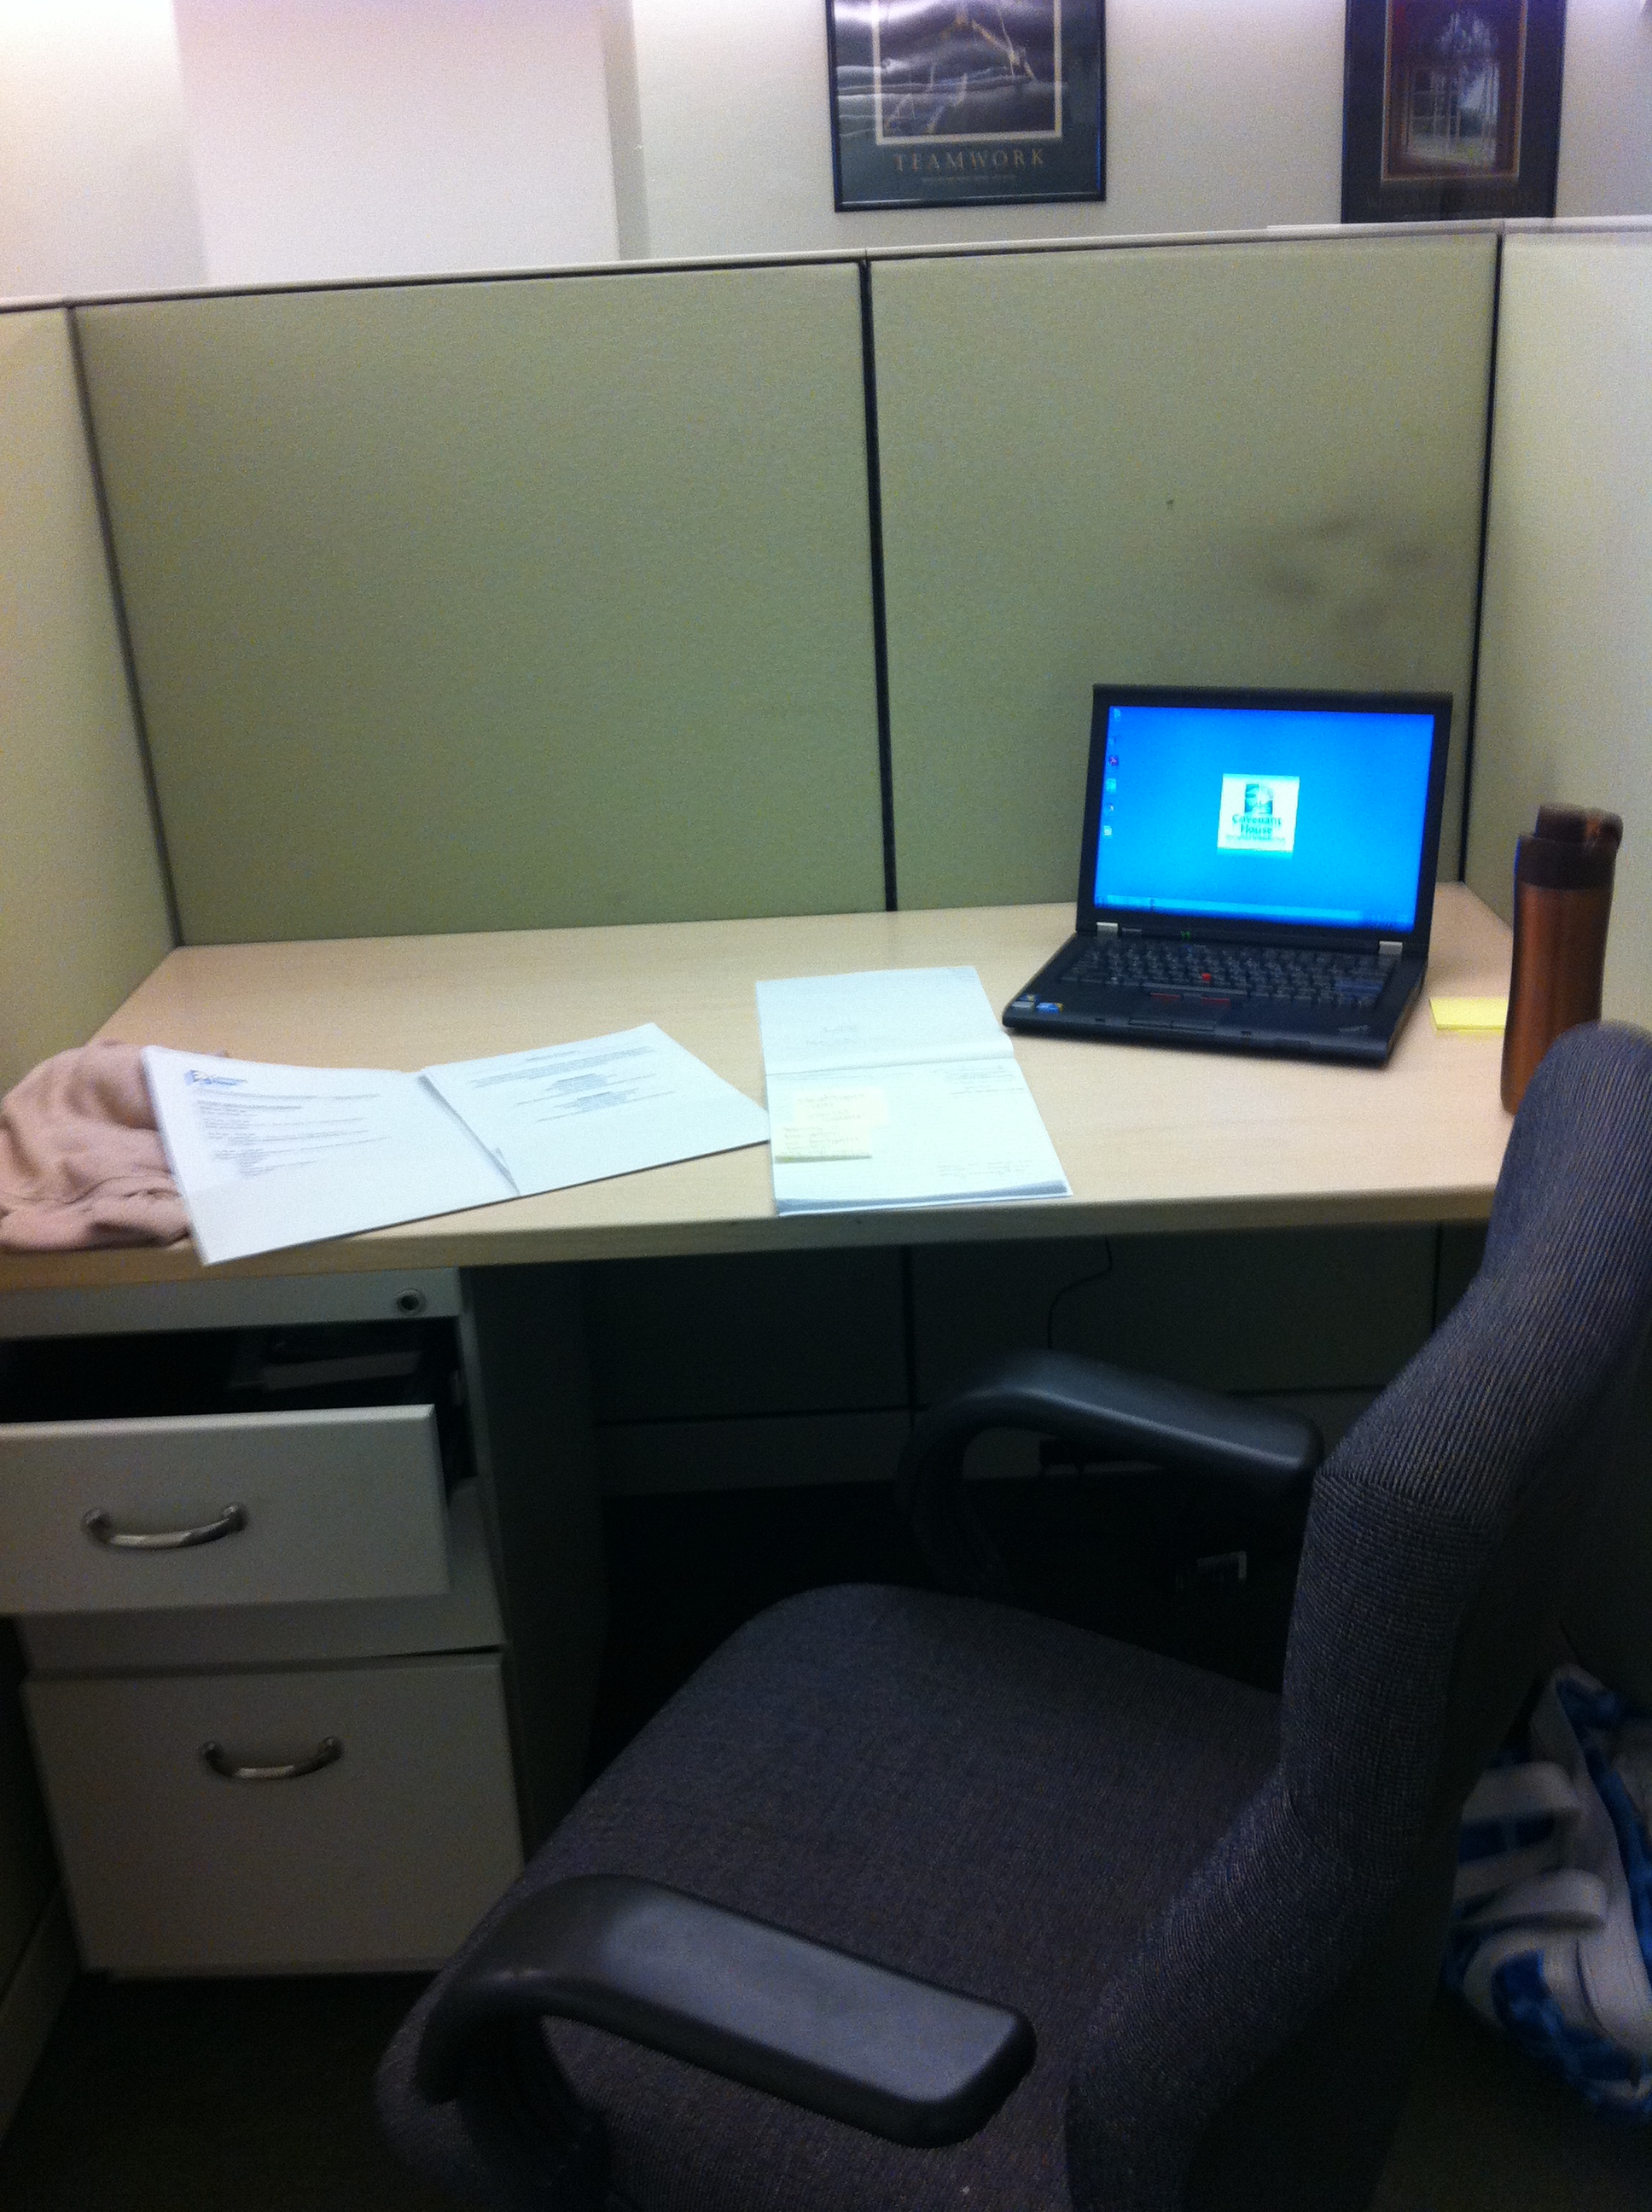 This is where I sit and get my work done!